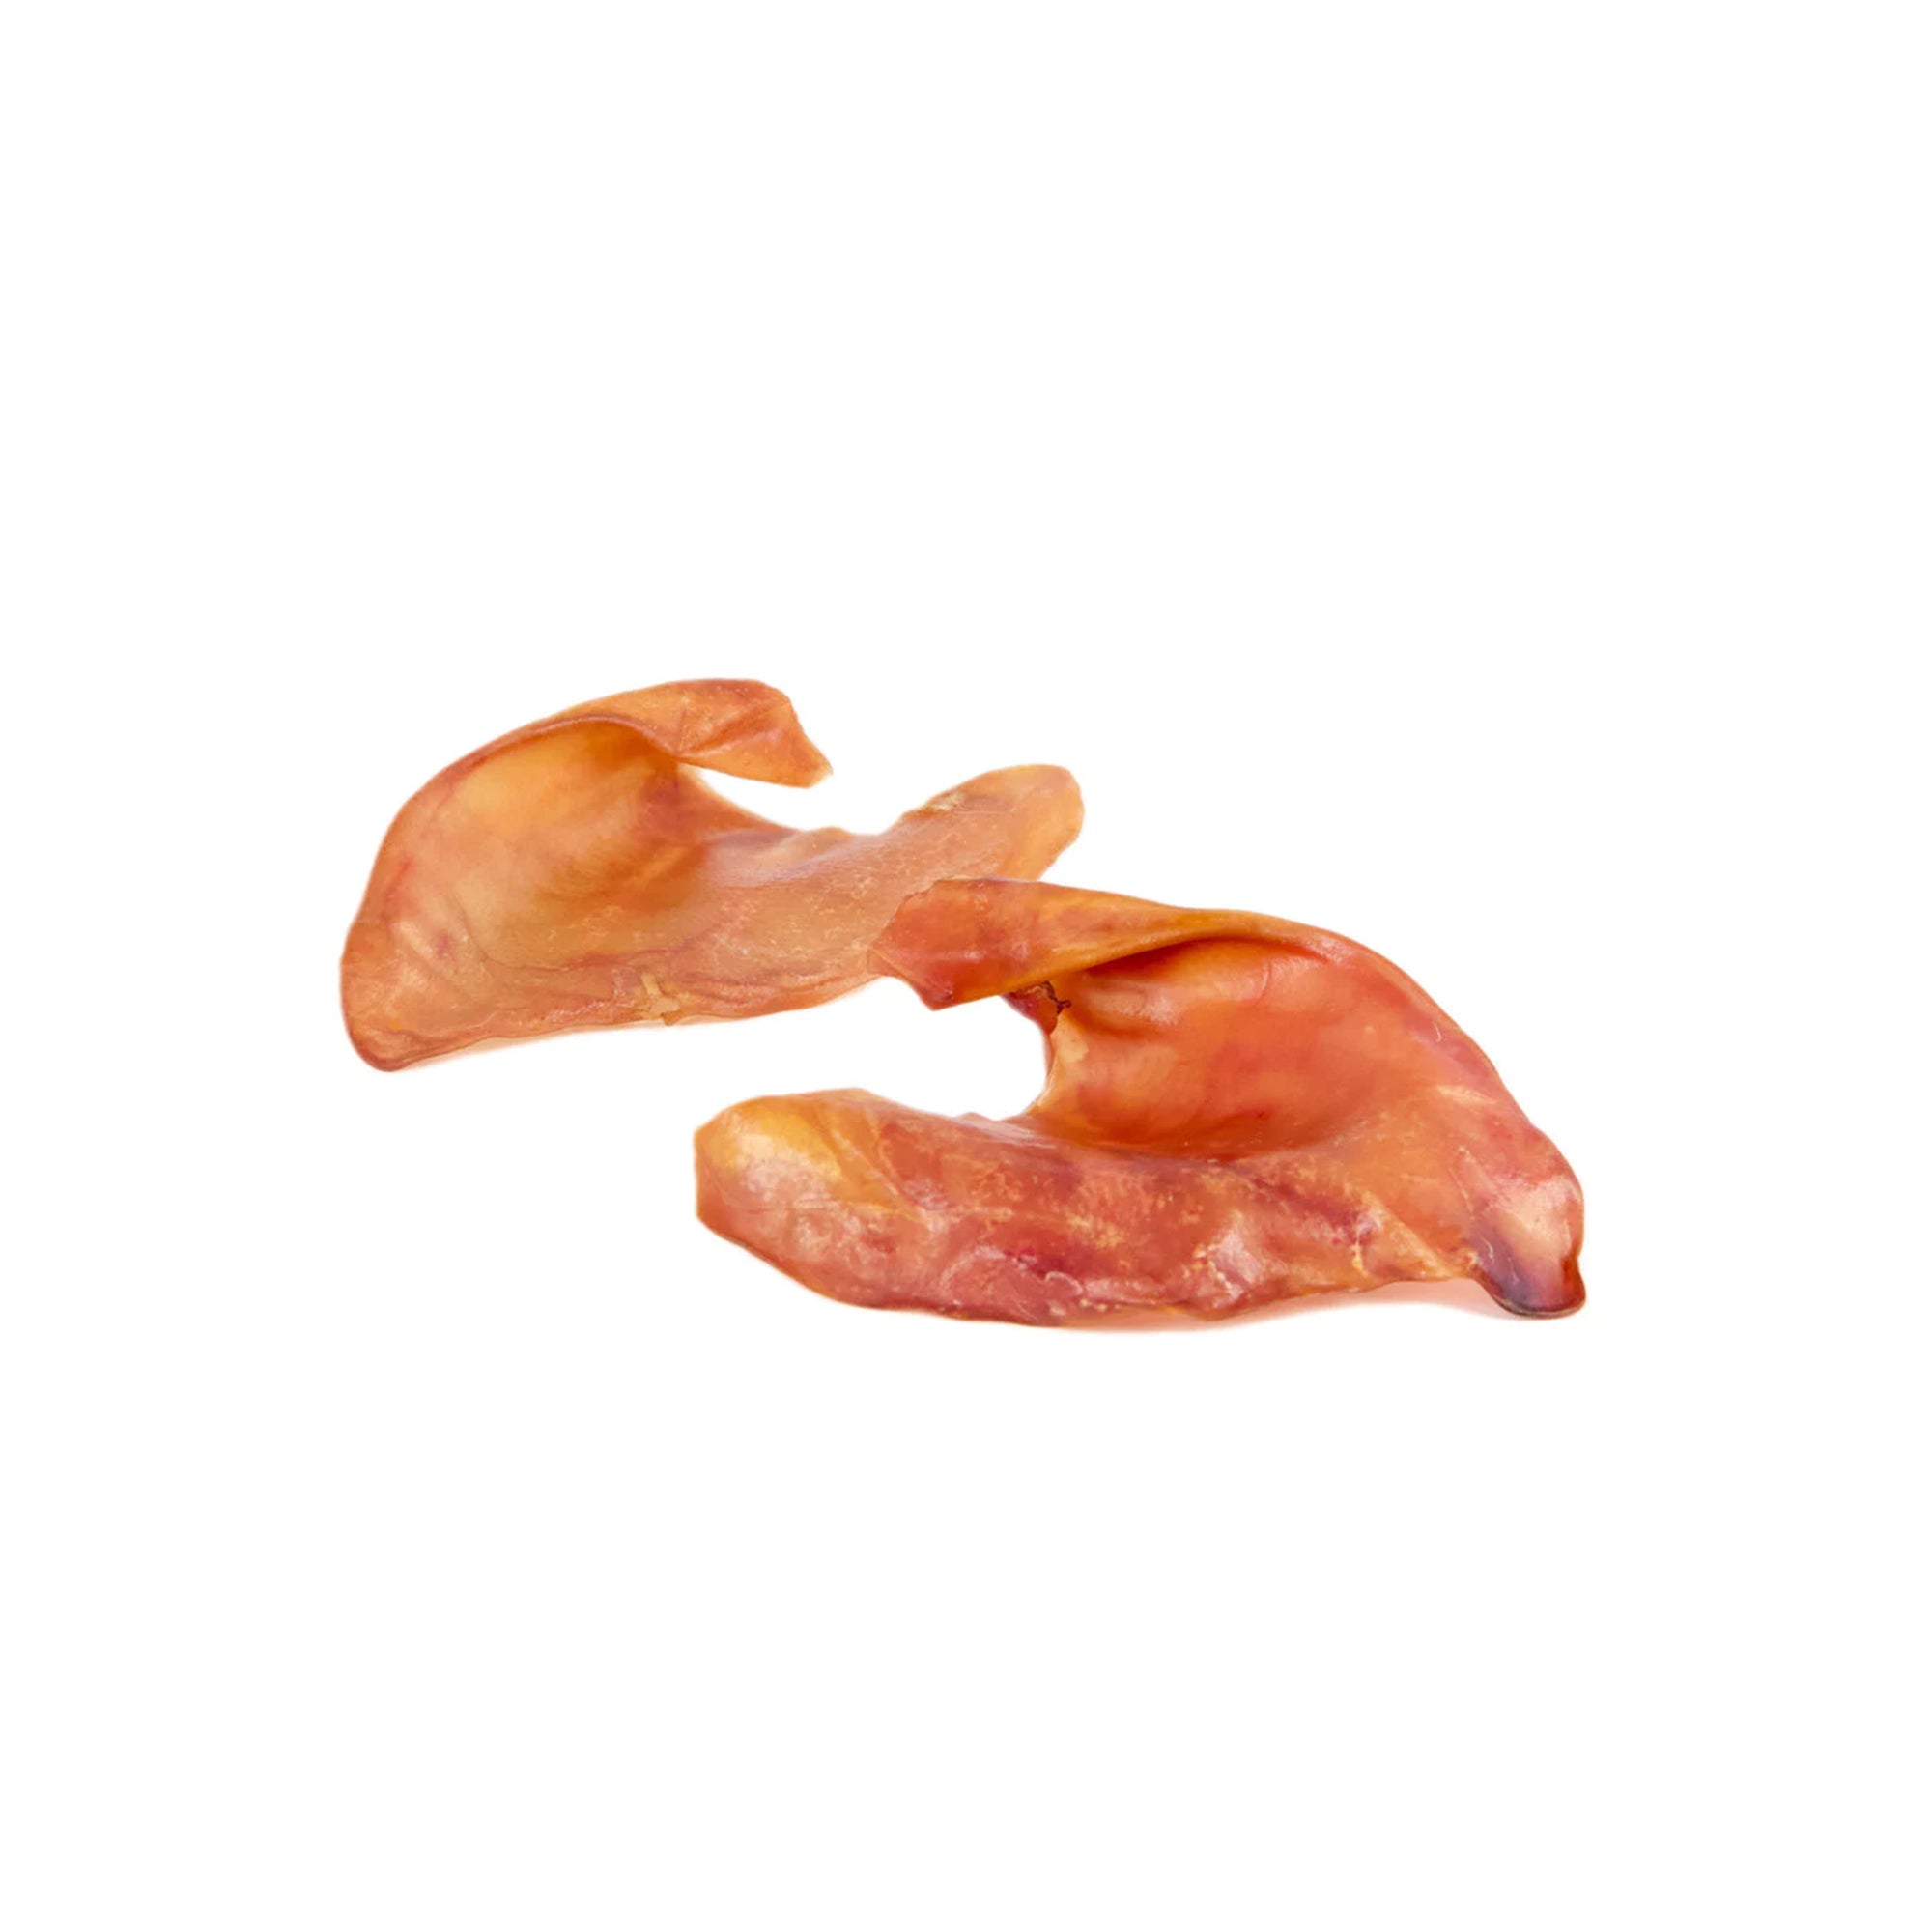 Pig Ears - 6 Count - Pig Ears - 6 Count - K9warehouse.com